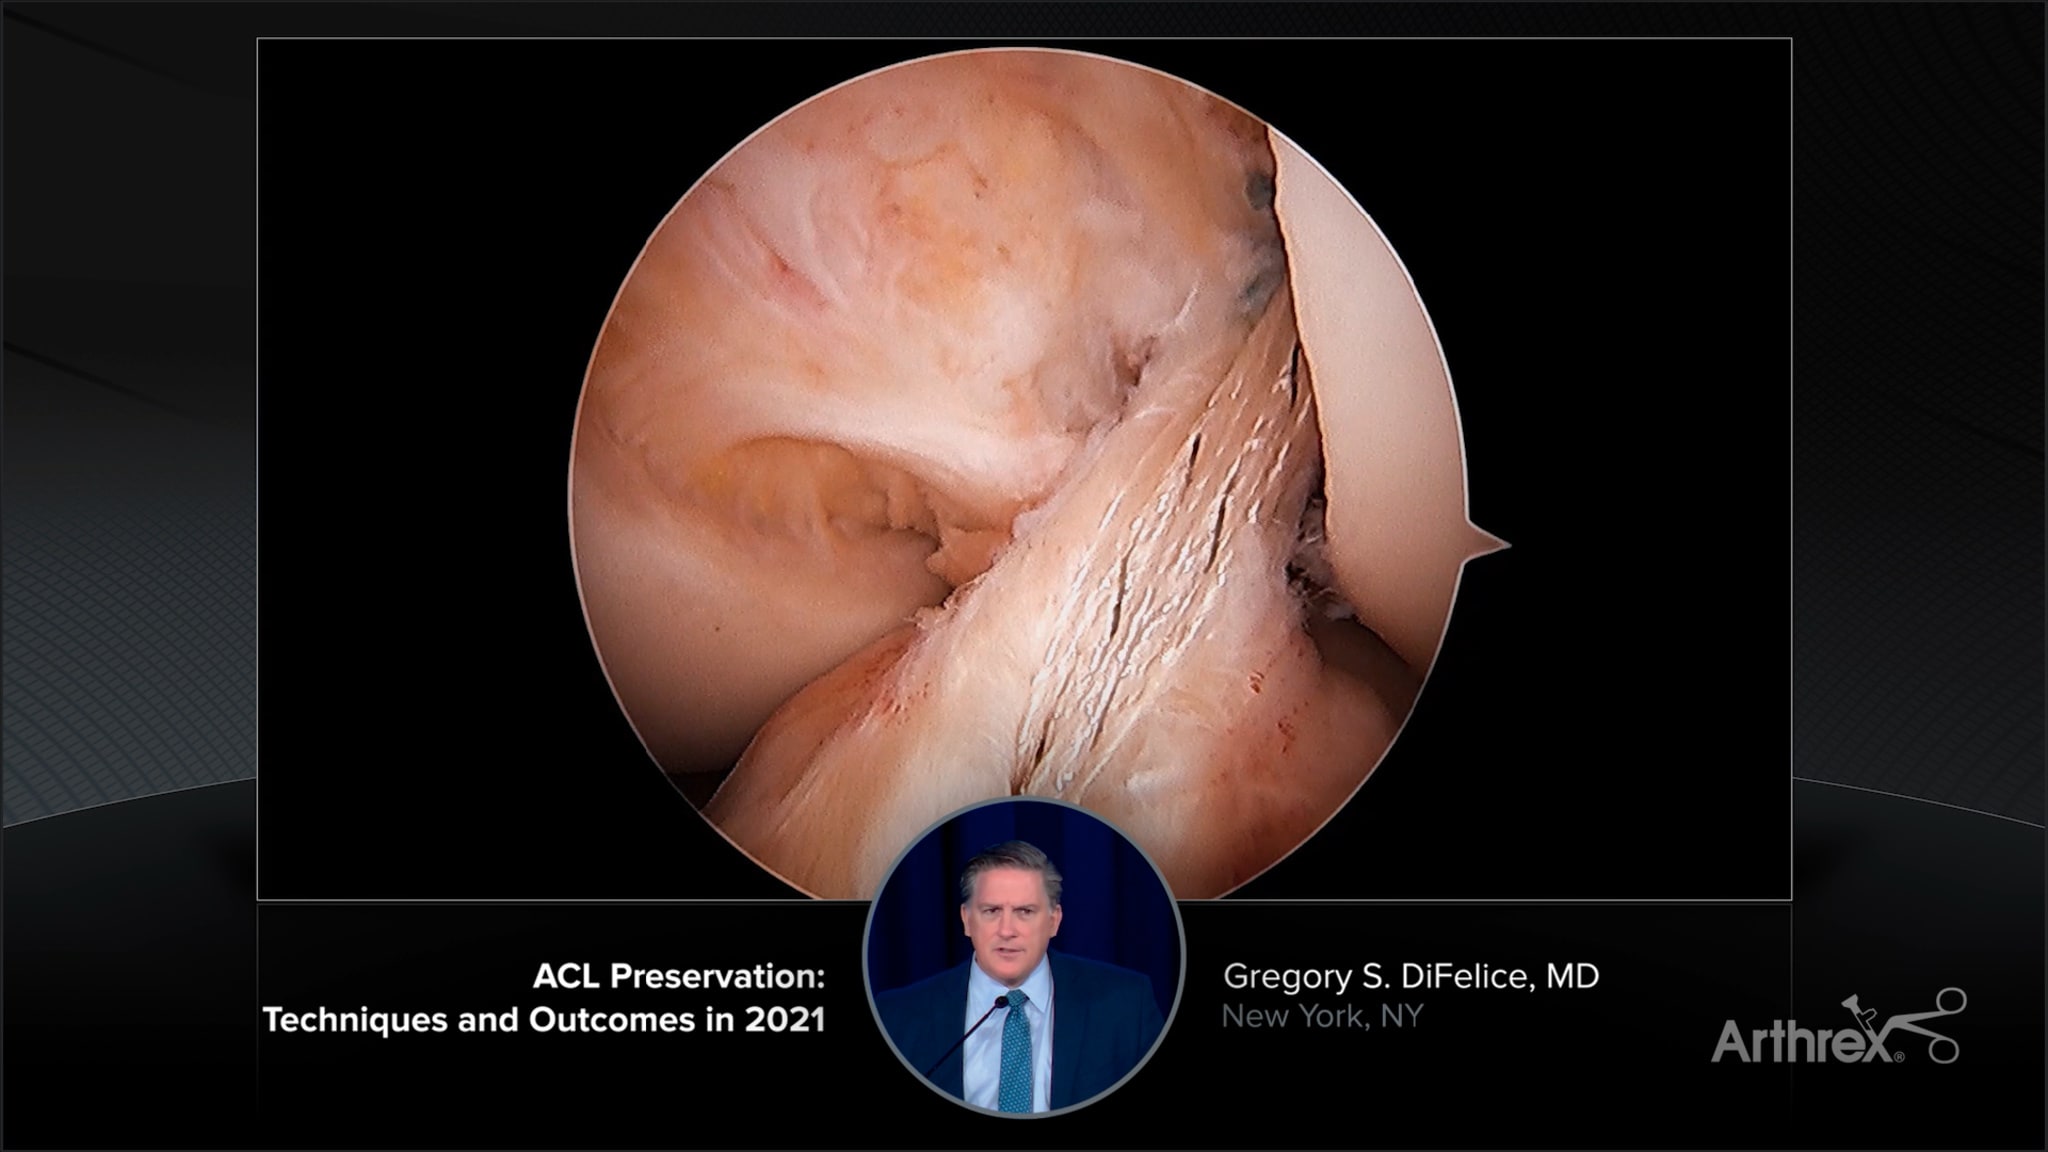 ACL Preservation: Techniques and Outcomes